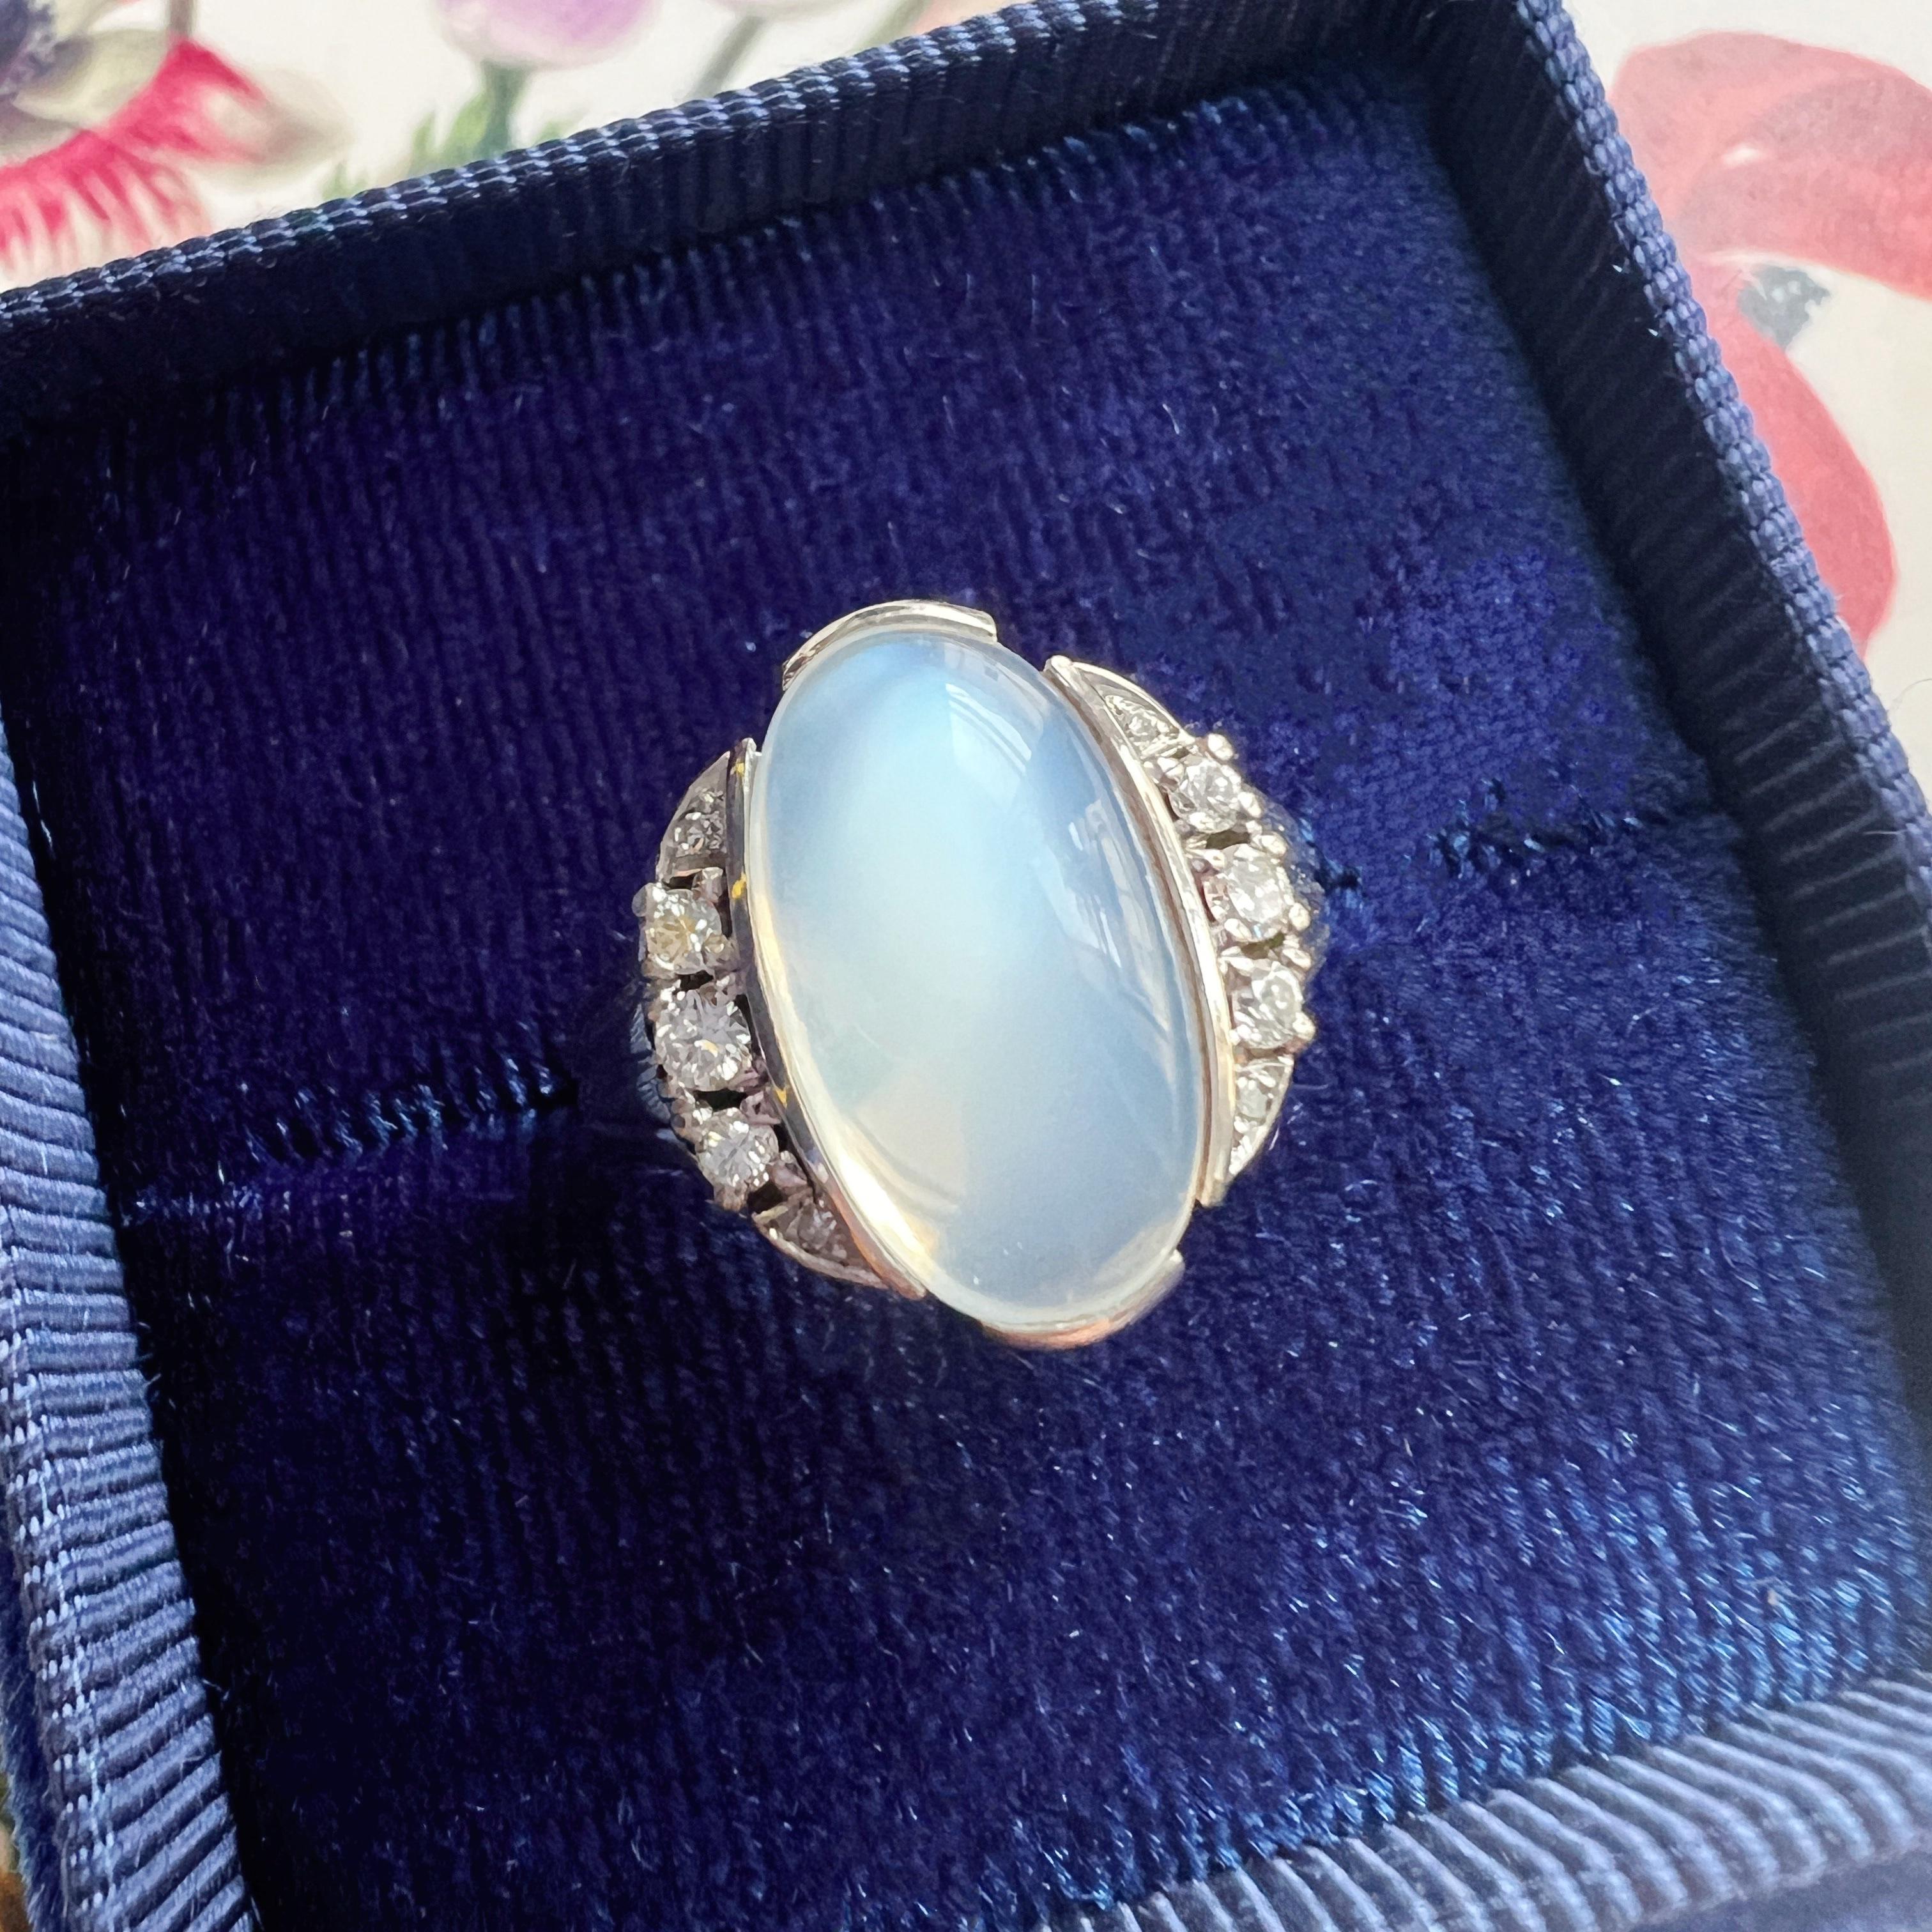 For sale an Art Deco era 18k white gold ring. At the heart of the ring is a large oval-shaped moonstone, measuring 15mm by 9.5mm, radiating with the most desirable bluish sheen. This feldspar gemstone, often associated with mystique and enchantment,